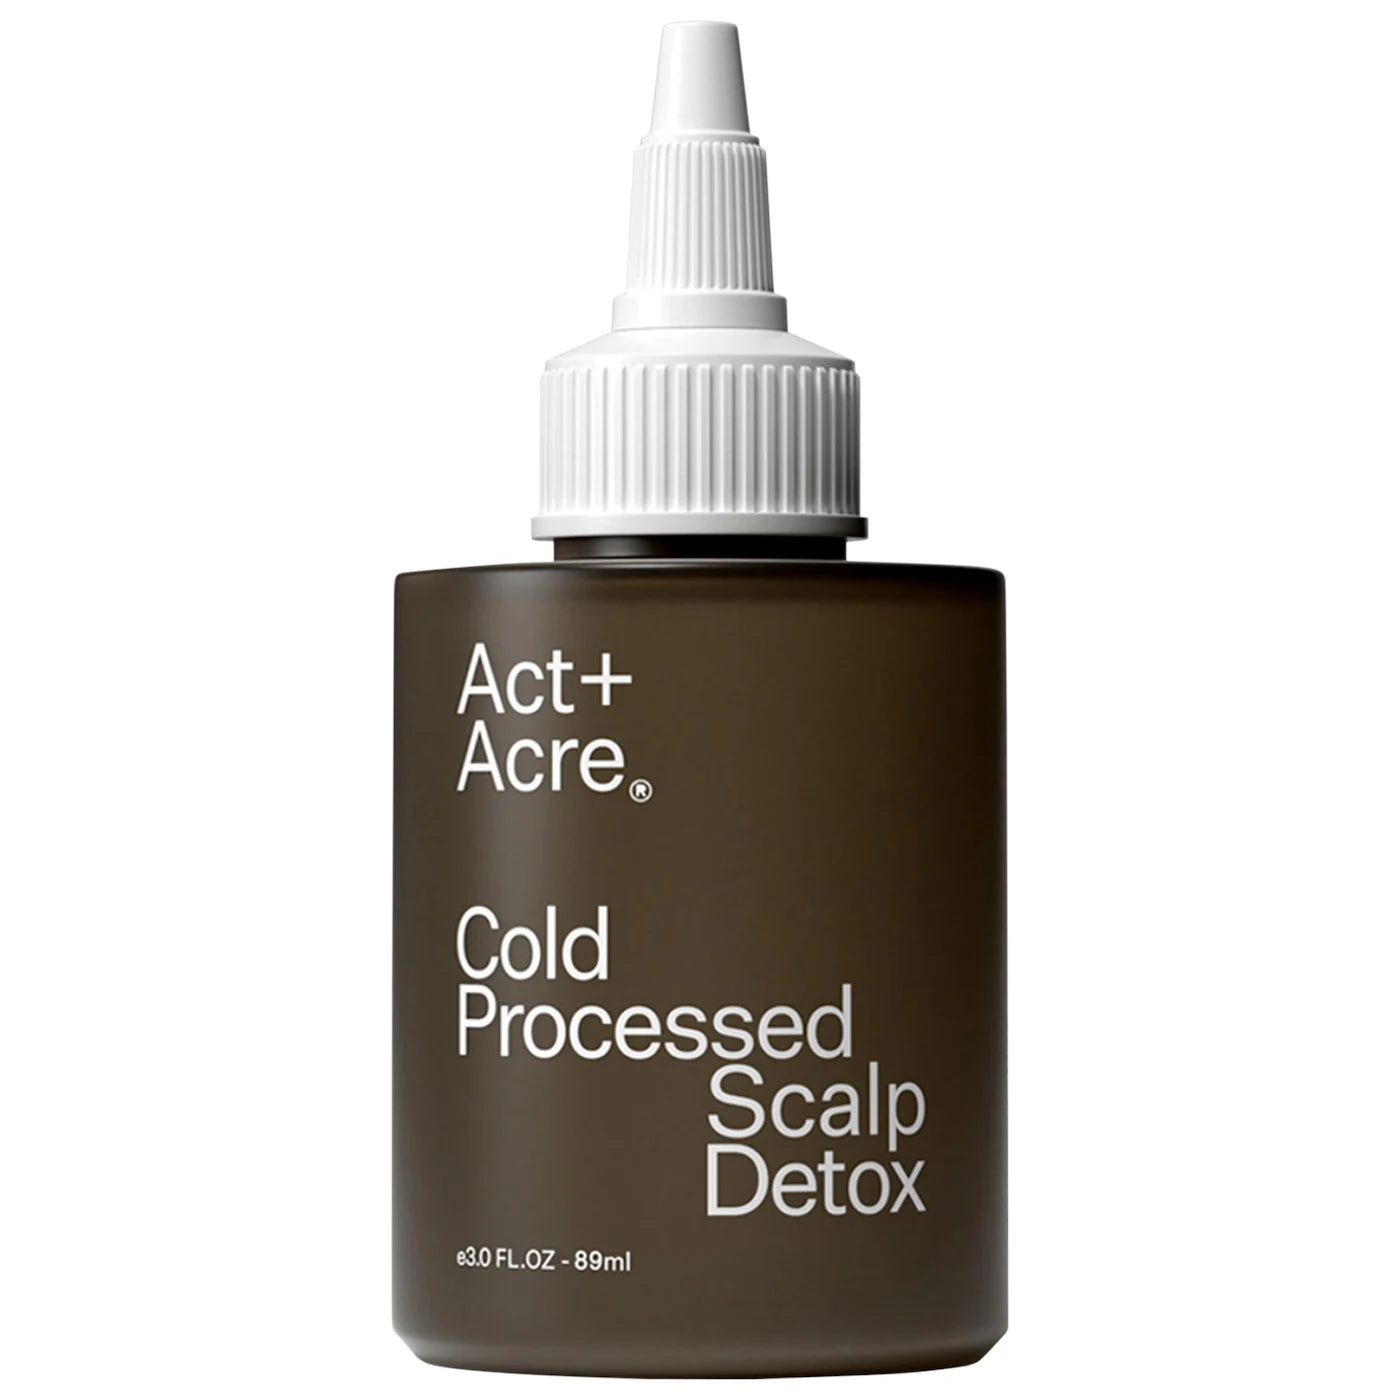 Act + Acre Cold Processed Scalp Detox